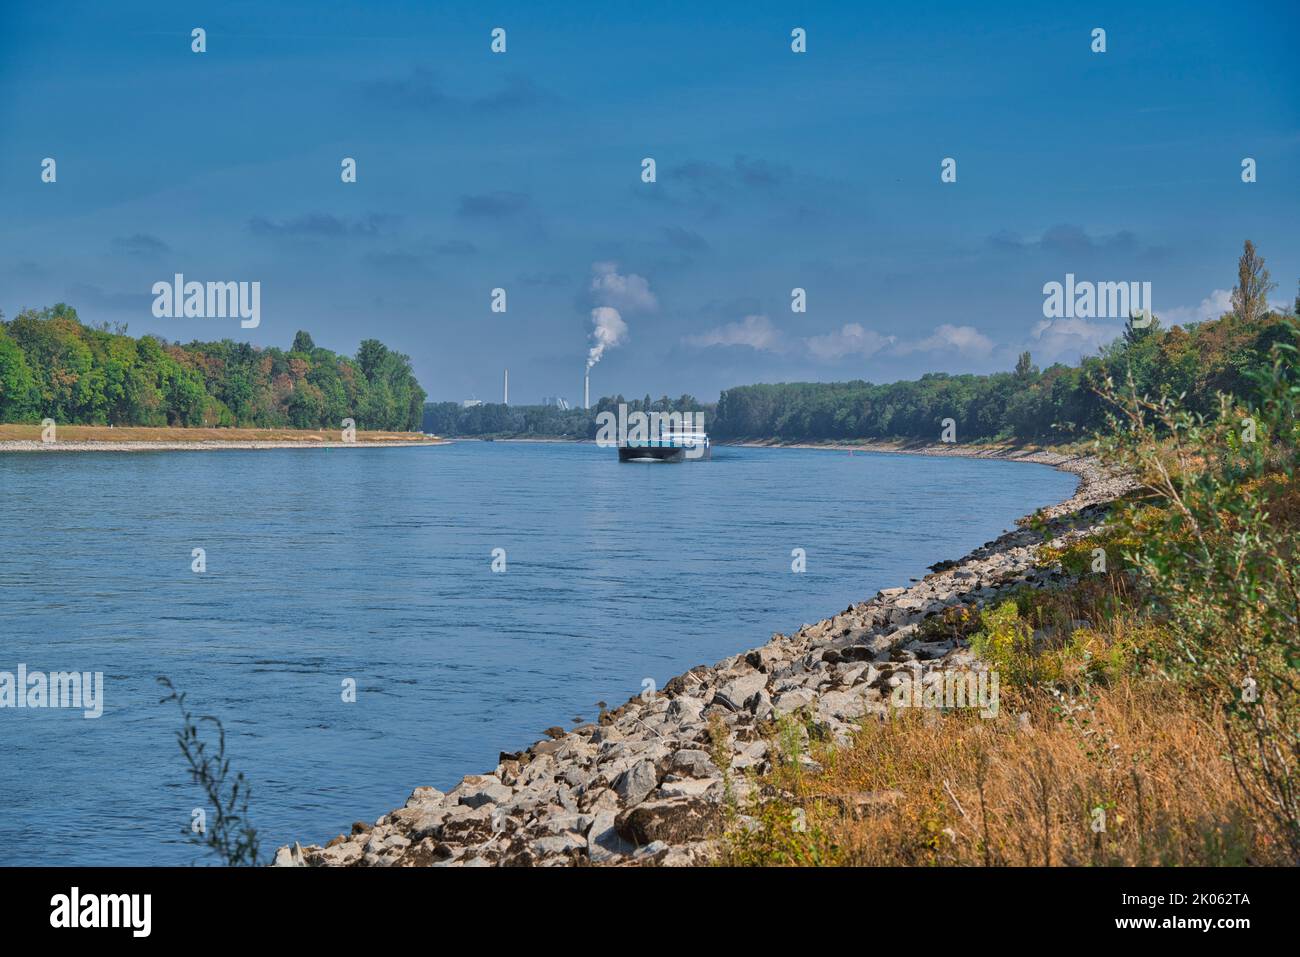 The RHEIN, GERMANY - September 2022: A beautiful shot of the cargo ship on the Rhine river near Mannheim in bright sunlight, Germany Stock Photo